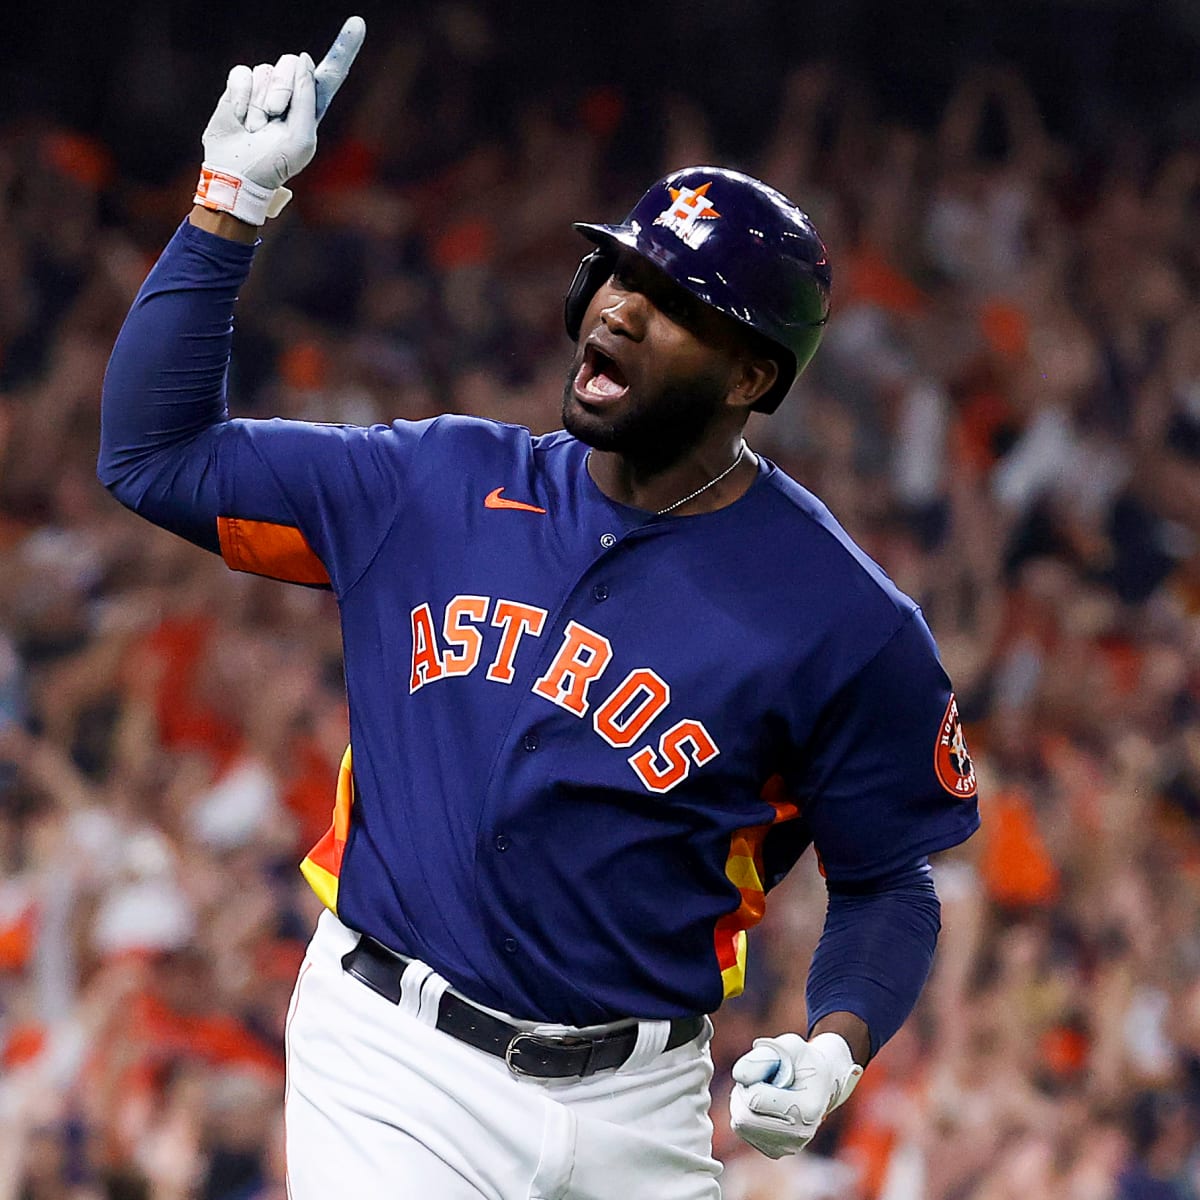 World Series Game 4 score: Takeaways from Astros no-hitter